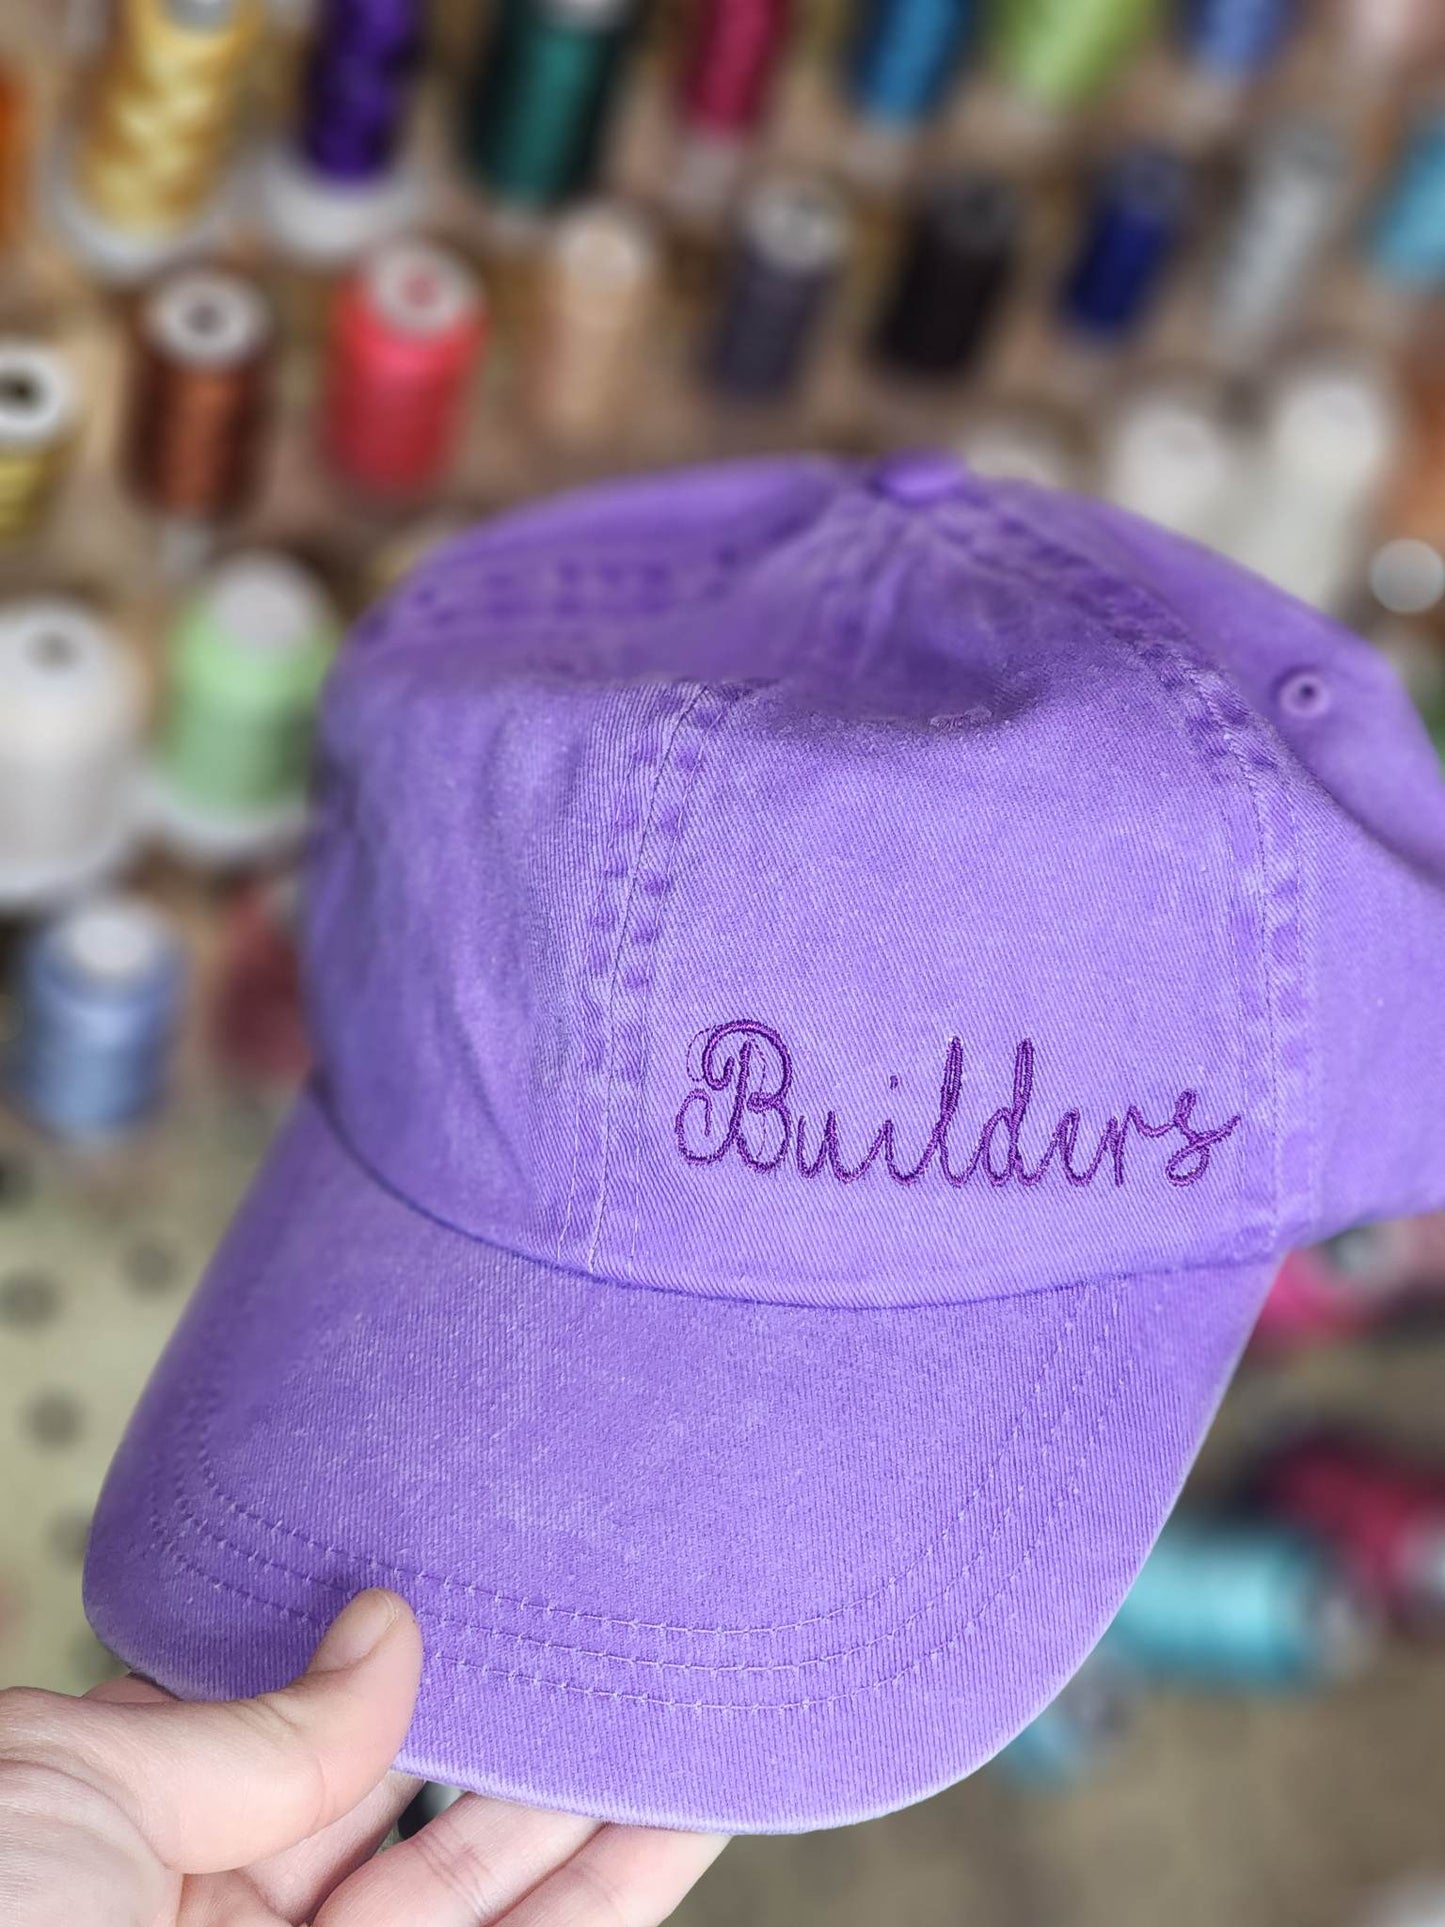 Builders Tone on Tone Unstructured Cap